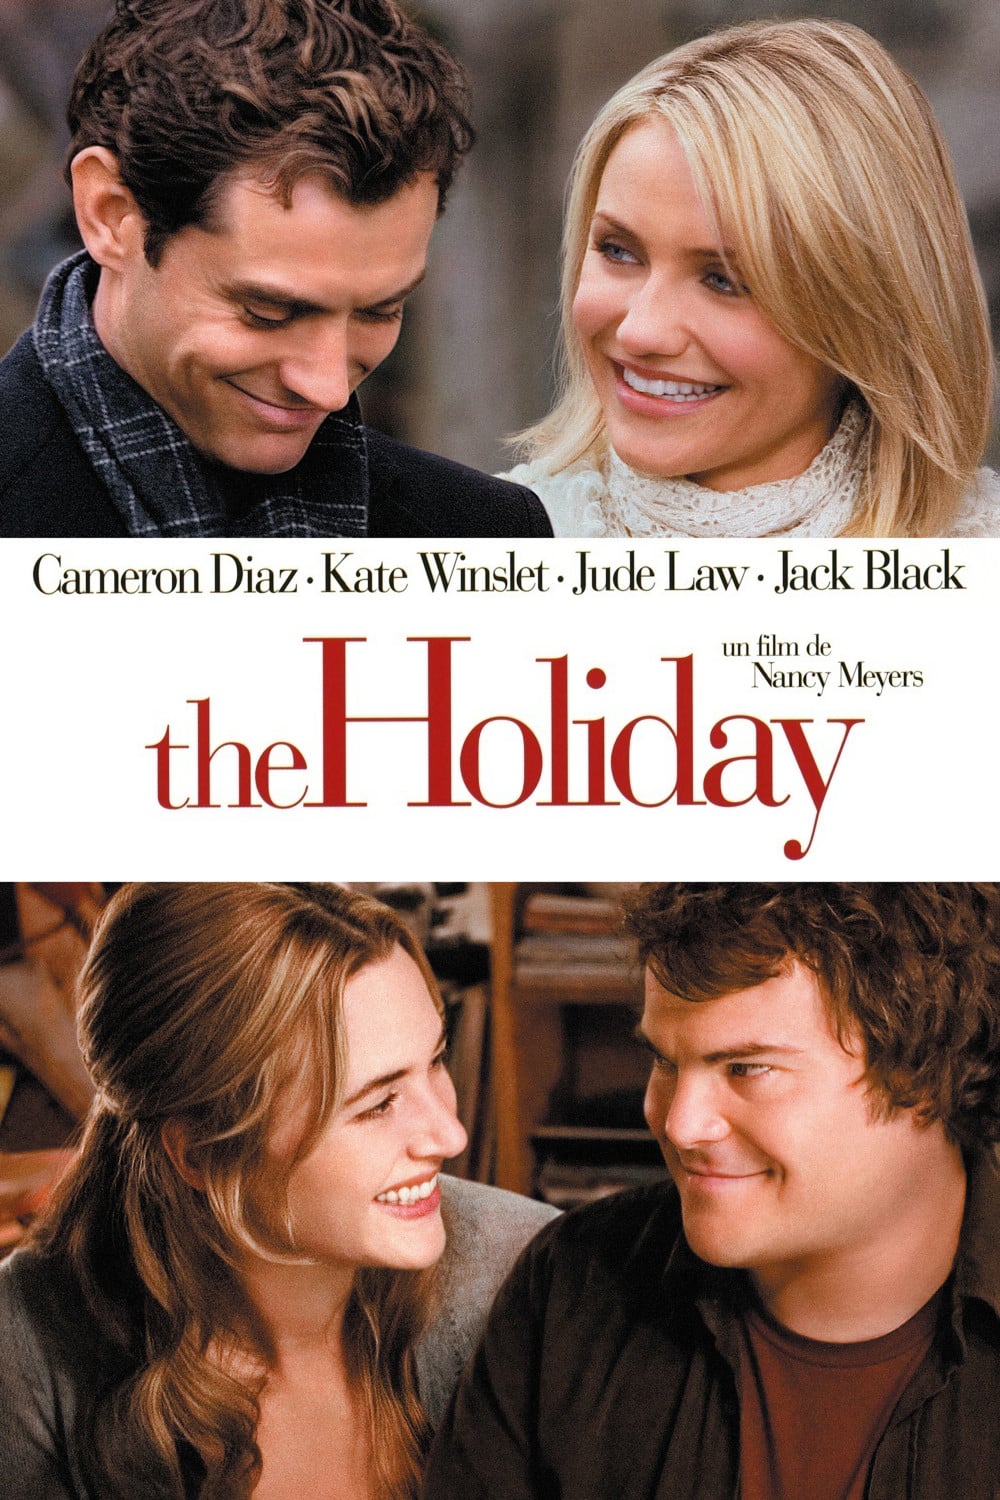 Affiche du film "The Holiday"